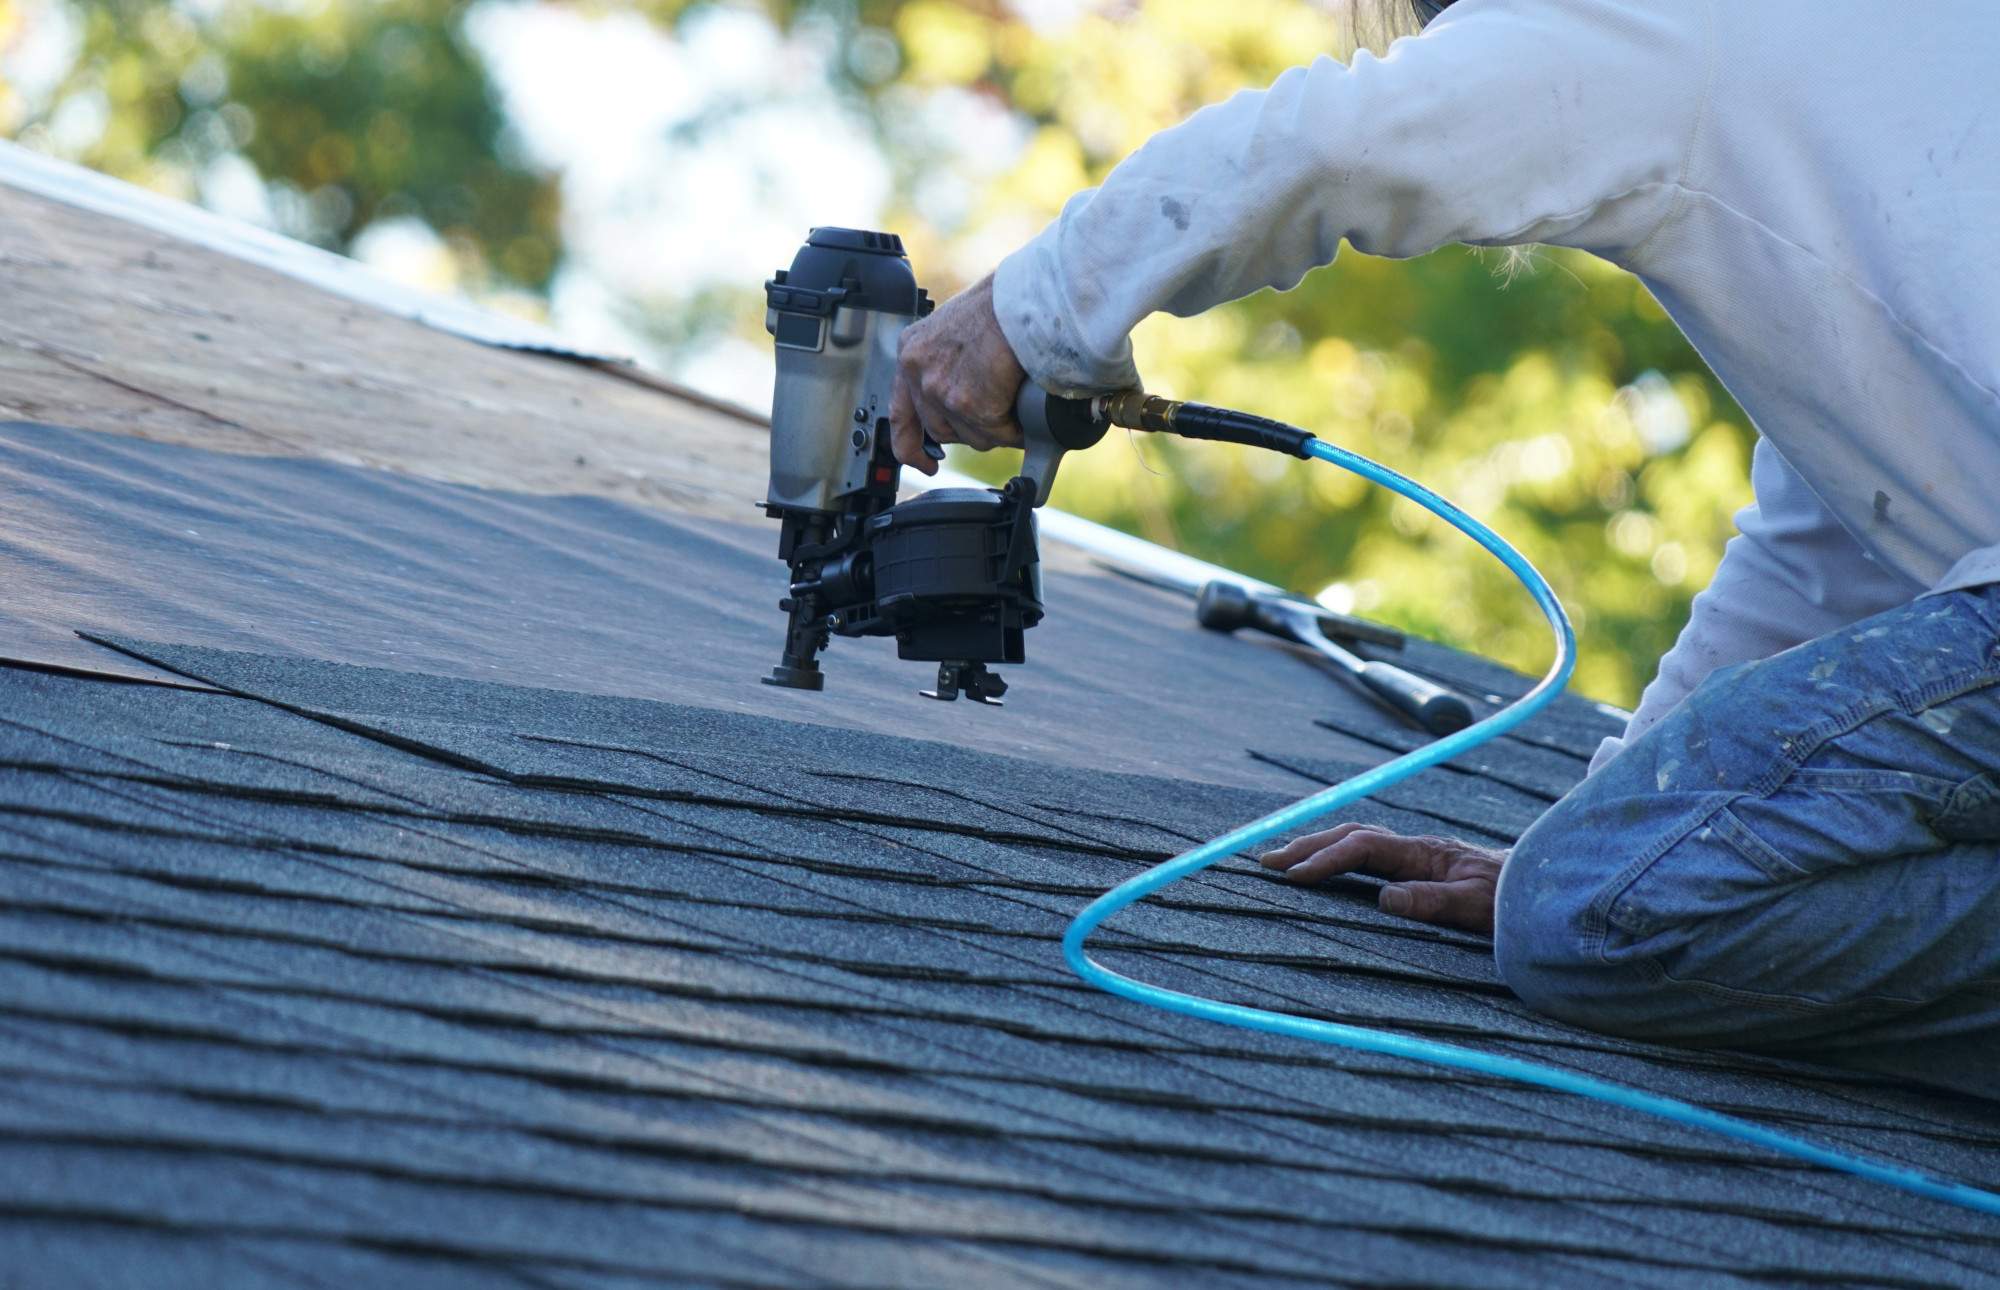 5 Roof Maintenance Tips To Help Keep Your Roof Waterproof